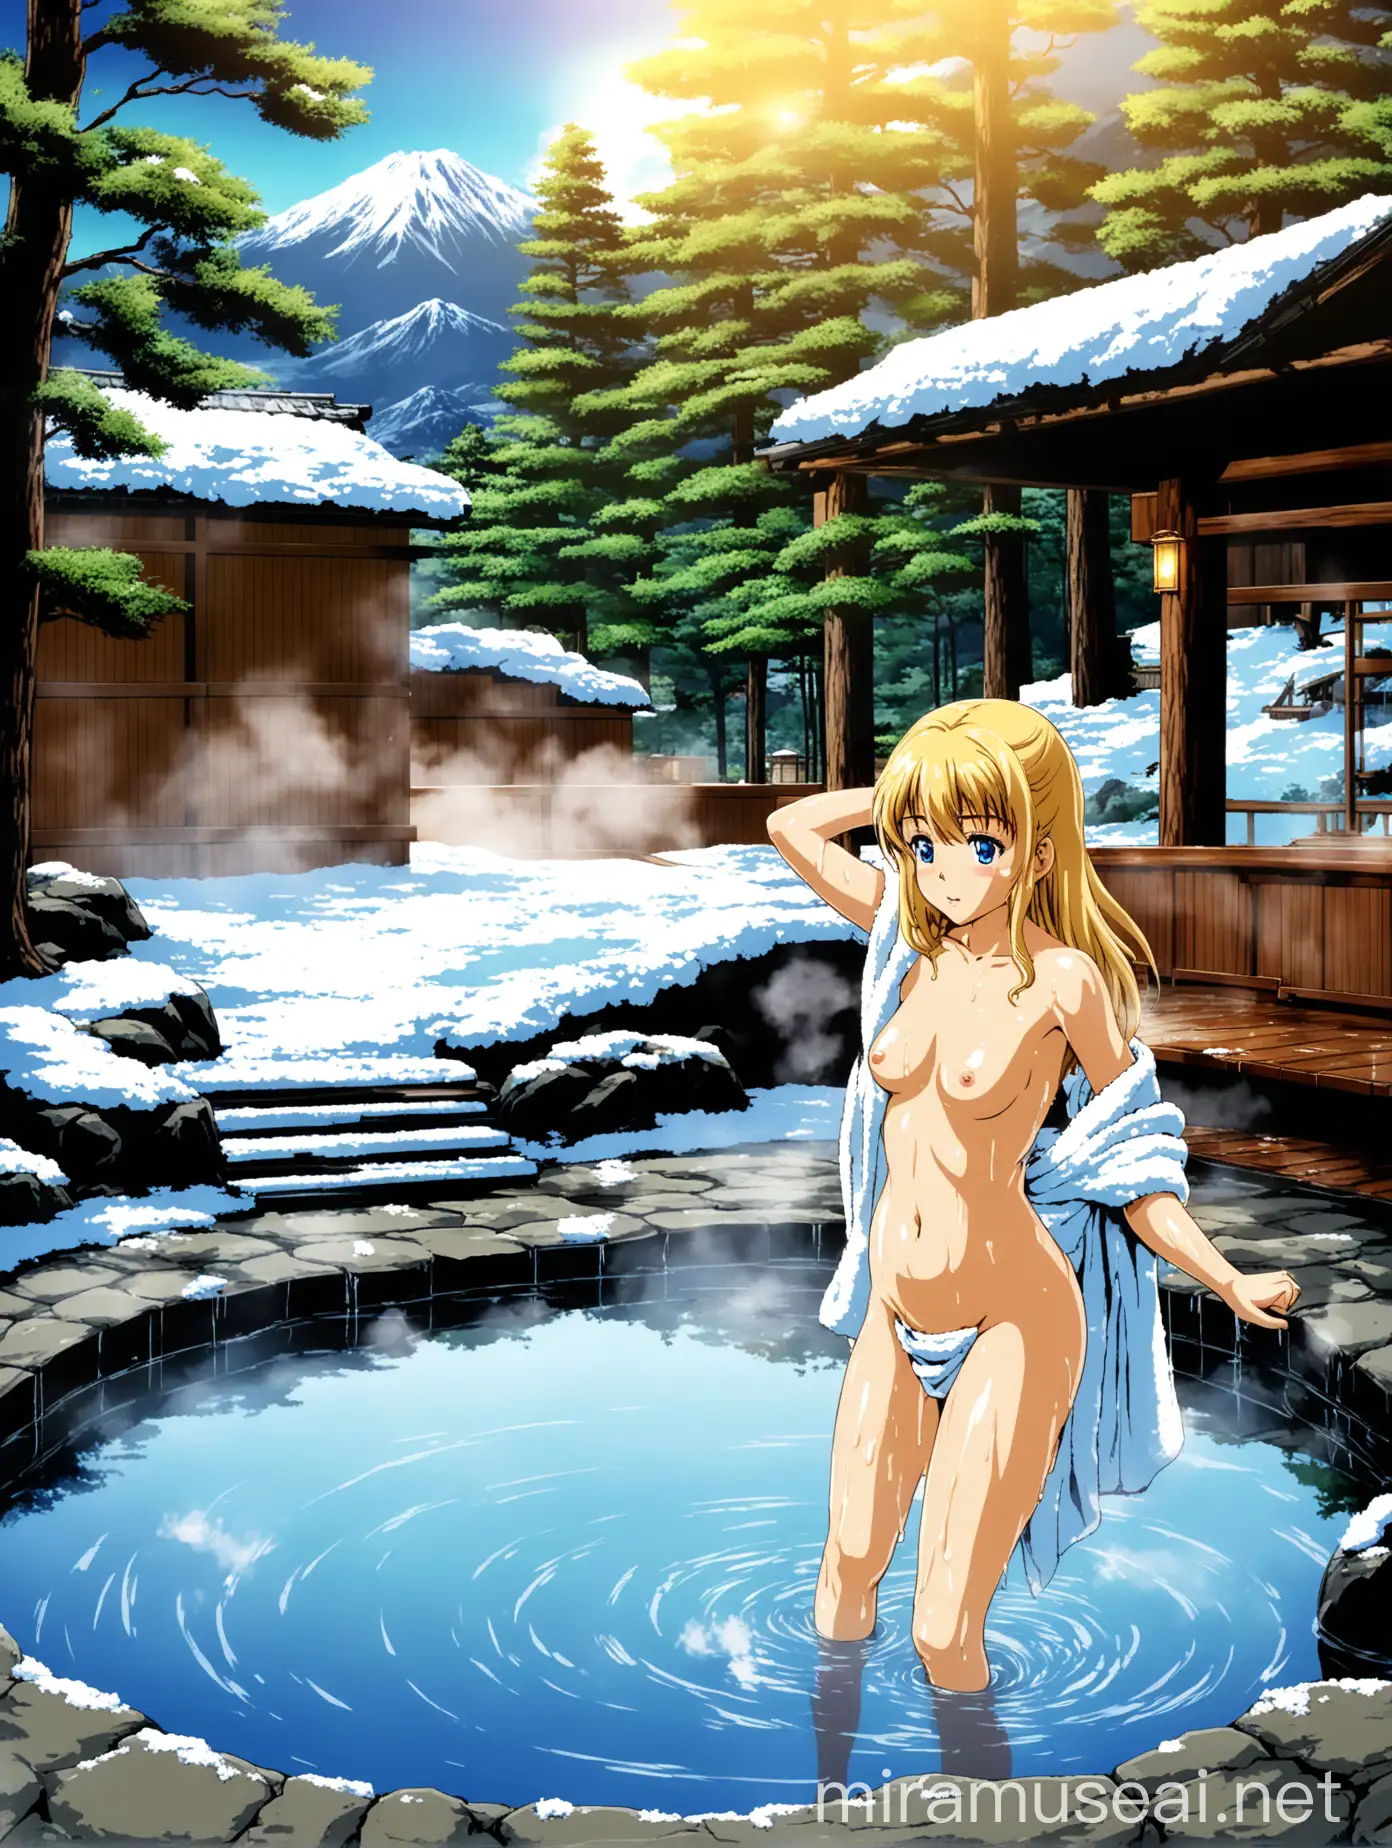 Magical Onsen Bathing Scene with GoldenHaired Woman